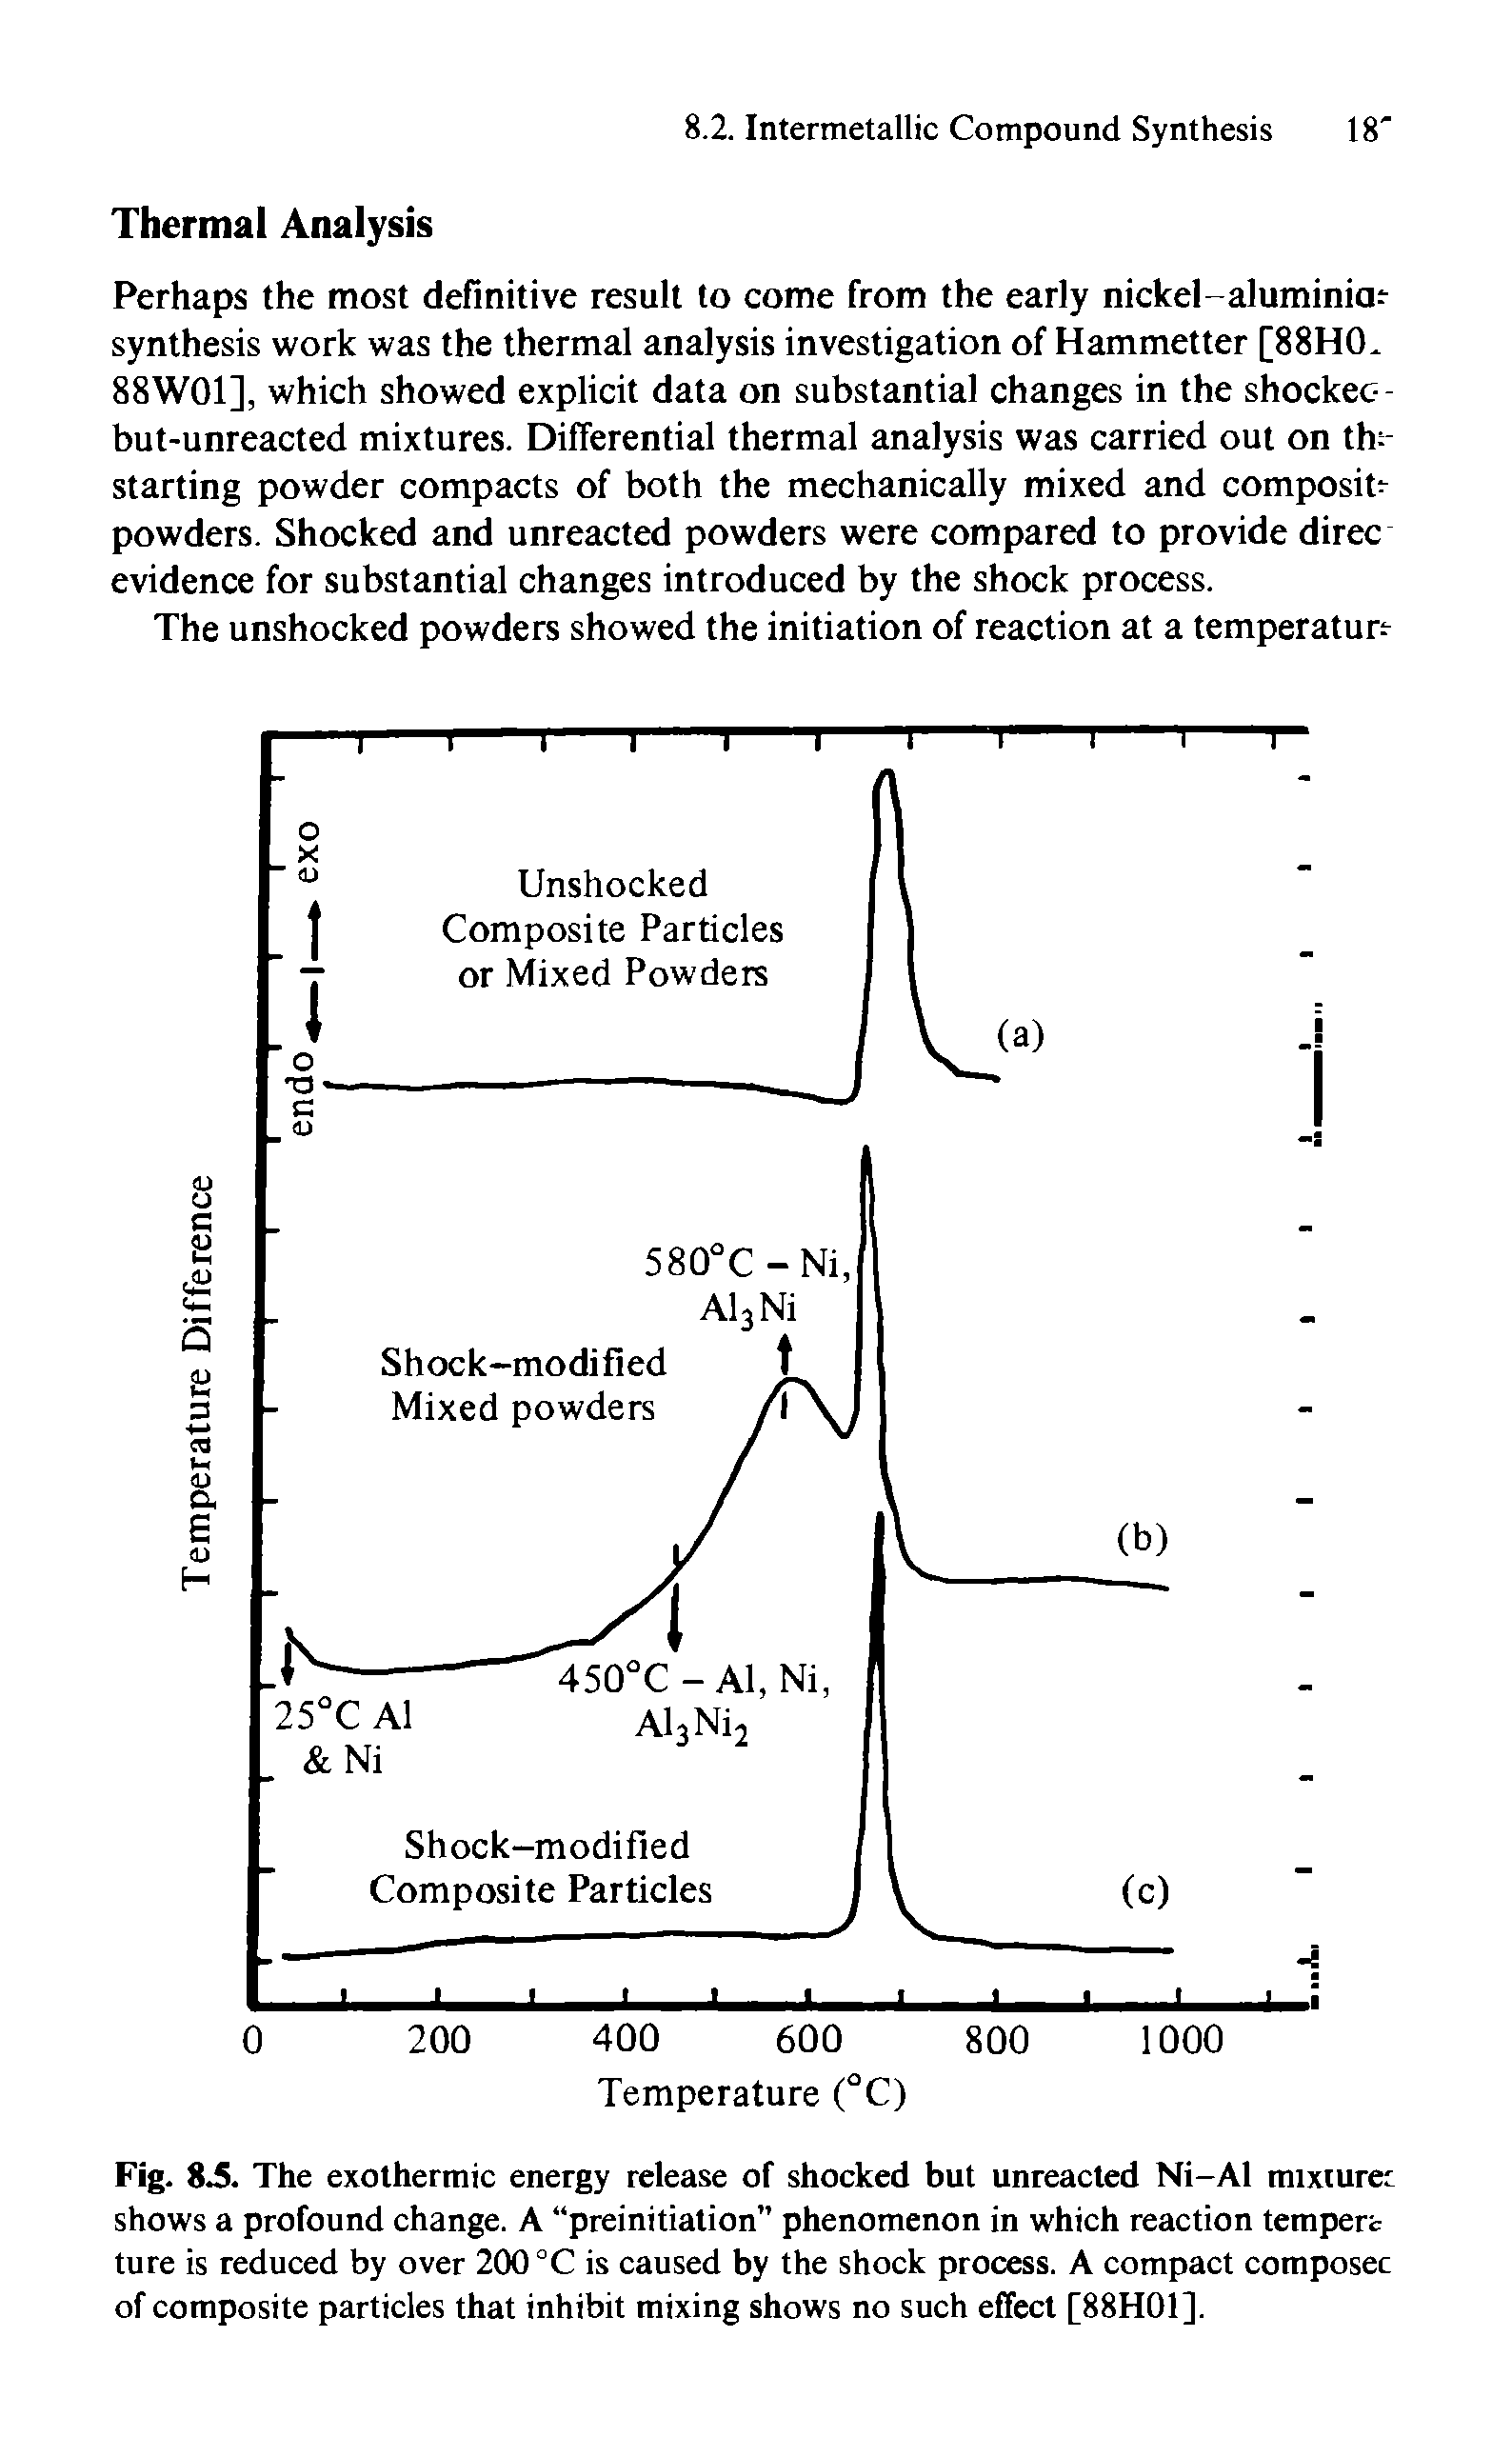 Fig. 8A. The exothermic energy release of shocked but unreacted Ni-Al mixtures shows a profound change. A preinitiation" phenomenon in which reaction temper ture is reduced by over 200 °C is caused by the shock process. A compact composer of composite particles that inhibit mixing shows no such effect [88H01].